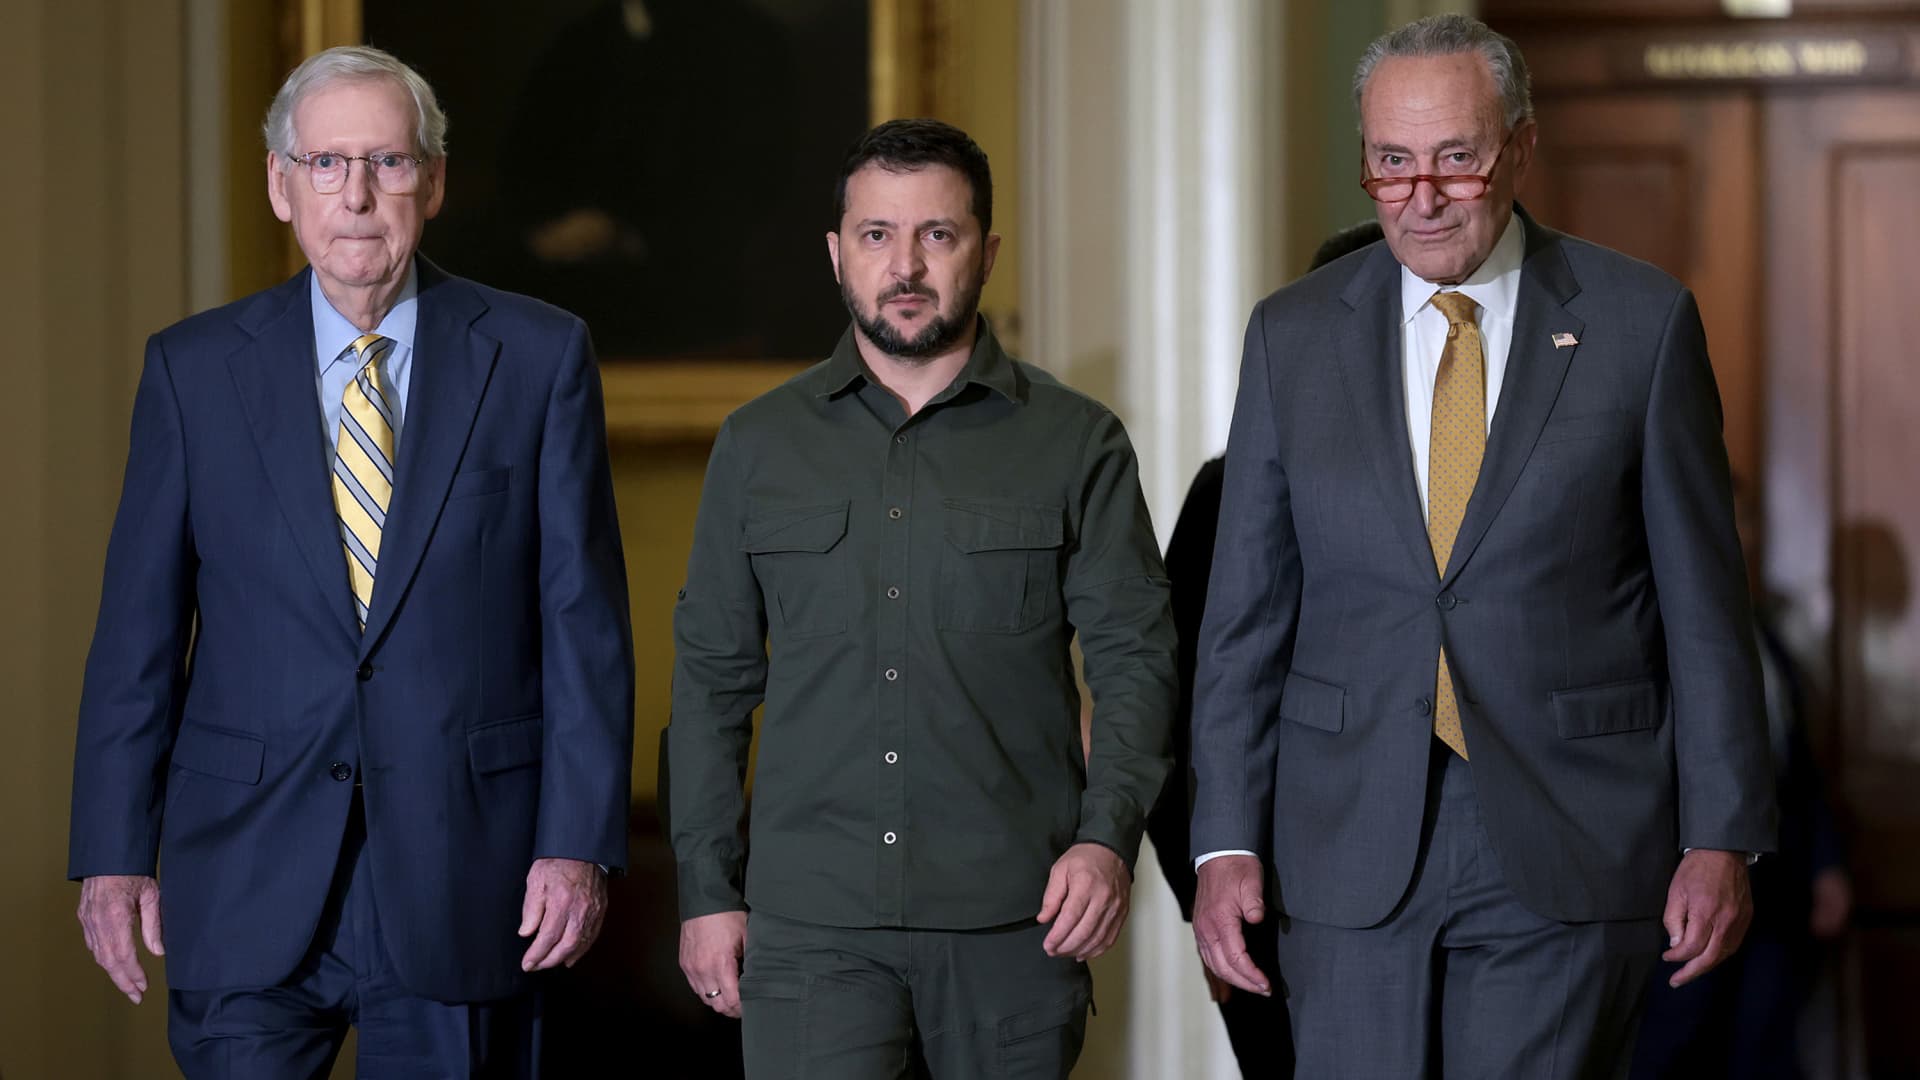 Ukraine chief Zelenskyy to meet up with with Biden, Congress as some Republicans sour on support